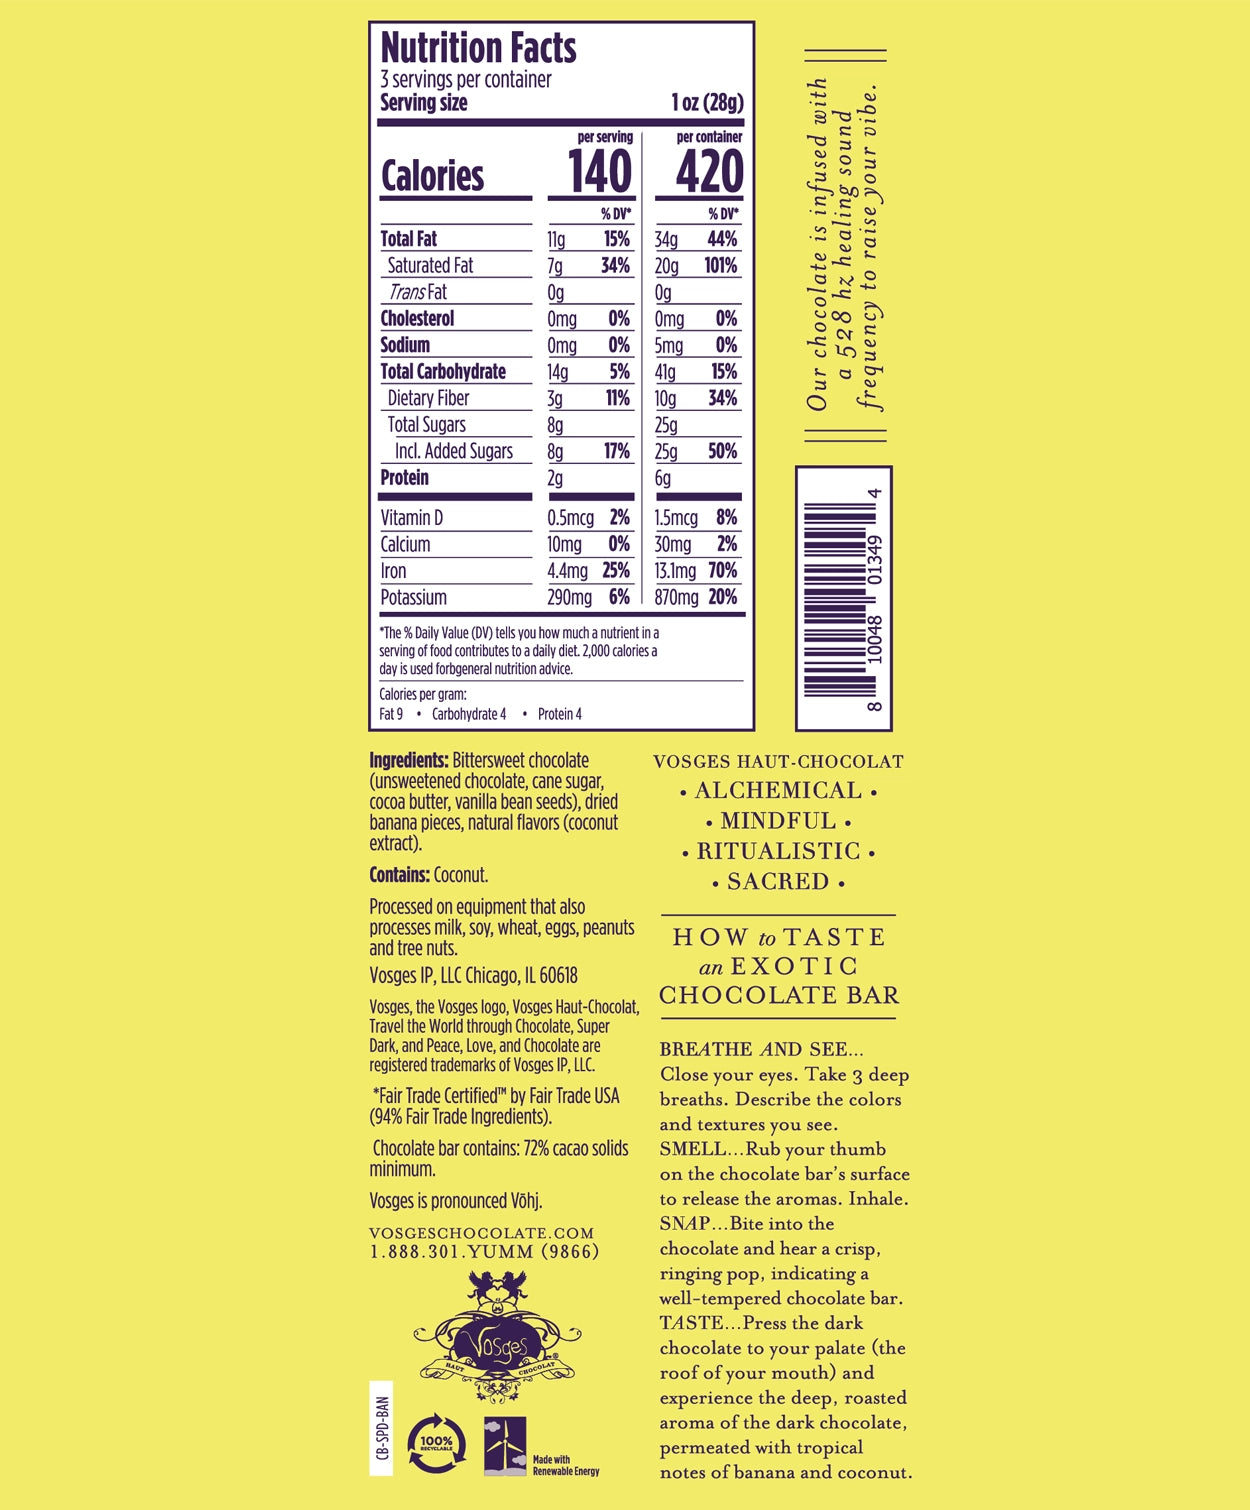 Nutrition Facts and Ingredients of Vosges Haut-Chocolat Banana Coconut bar in purple, san-serif font on a bright yellow background.Nutrition Facts and Ingredients of Vosges Haut-Chocolat Banana Coconut bar in purple, san-serif font on a bright yellow background.